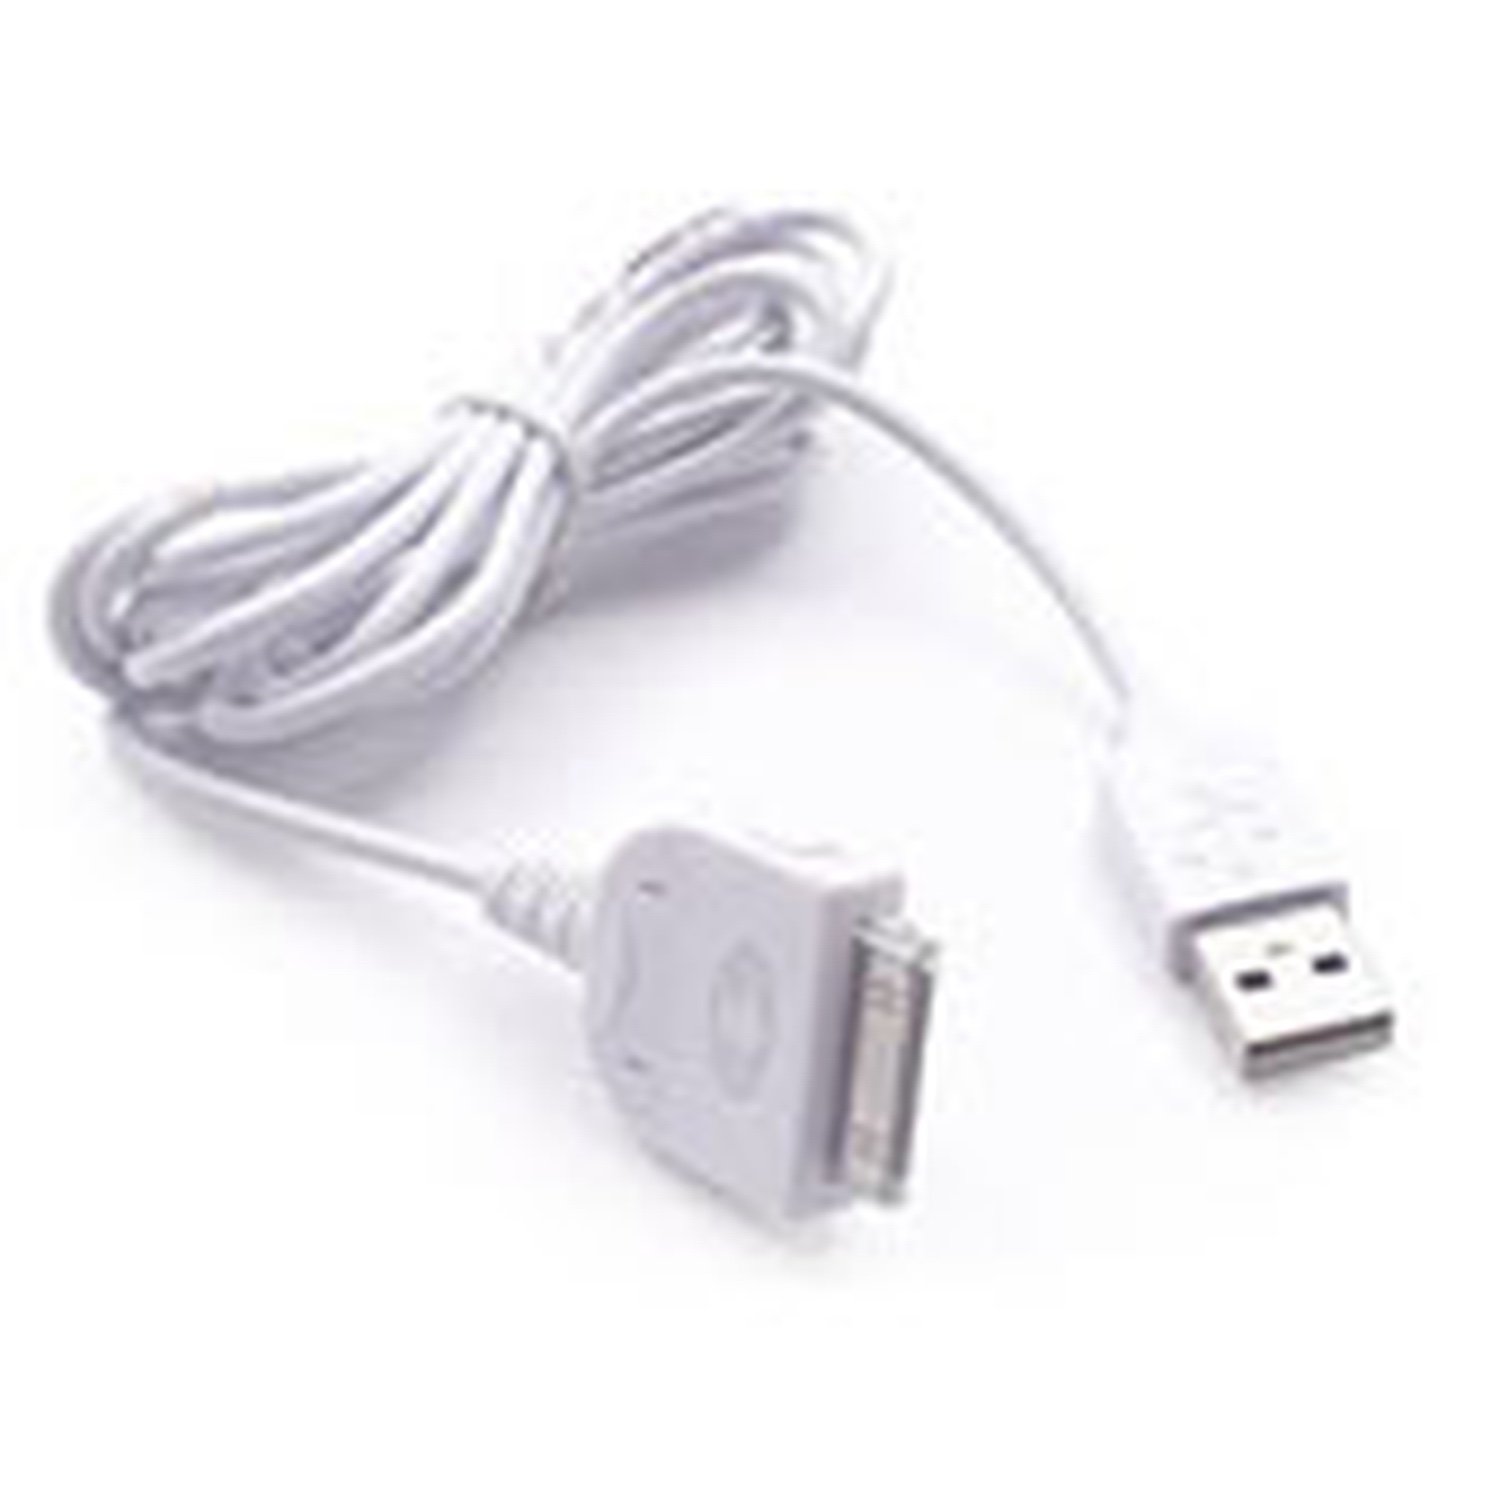 Cord Connector Usb 2.0 Voor Itouch, Iphone, Iphone 3G, Iphone 4G, iphone 4 4s Ipad, Ipad 2